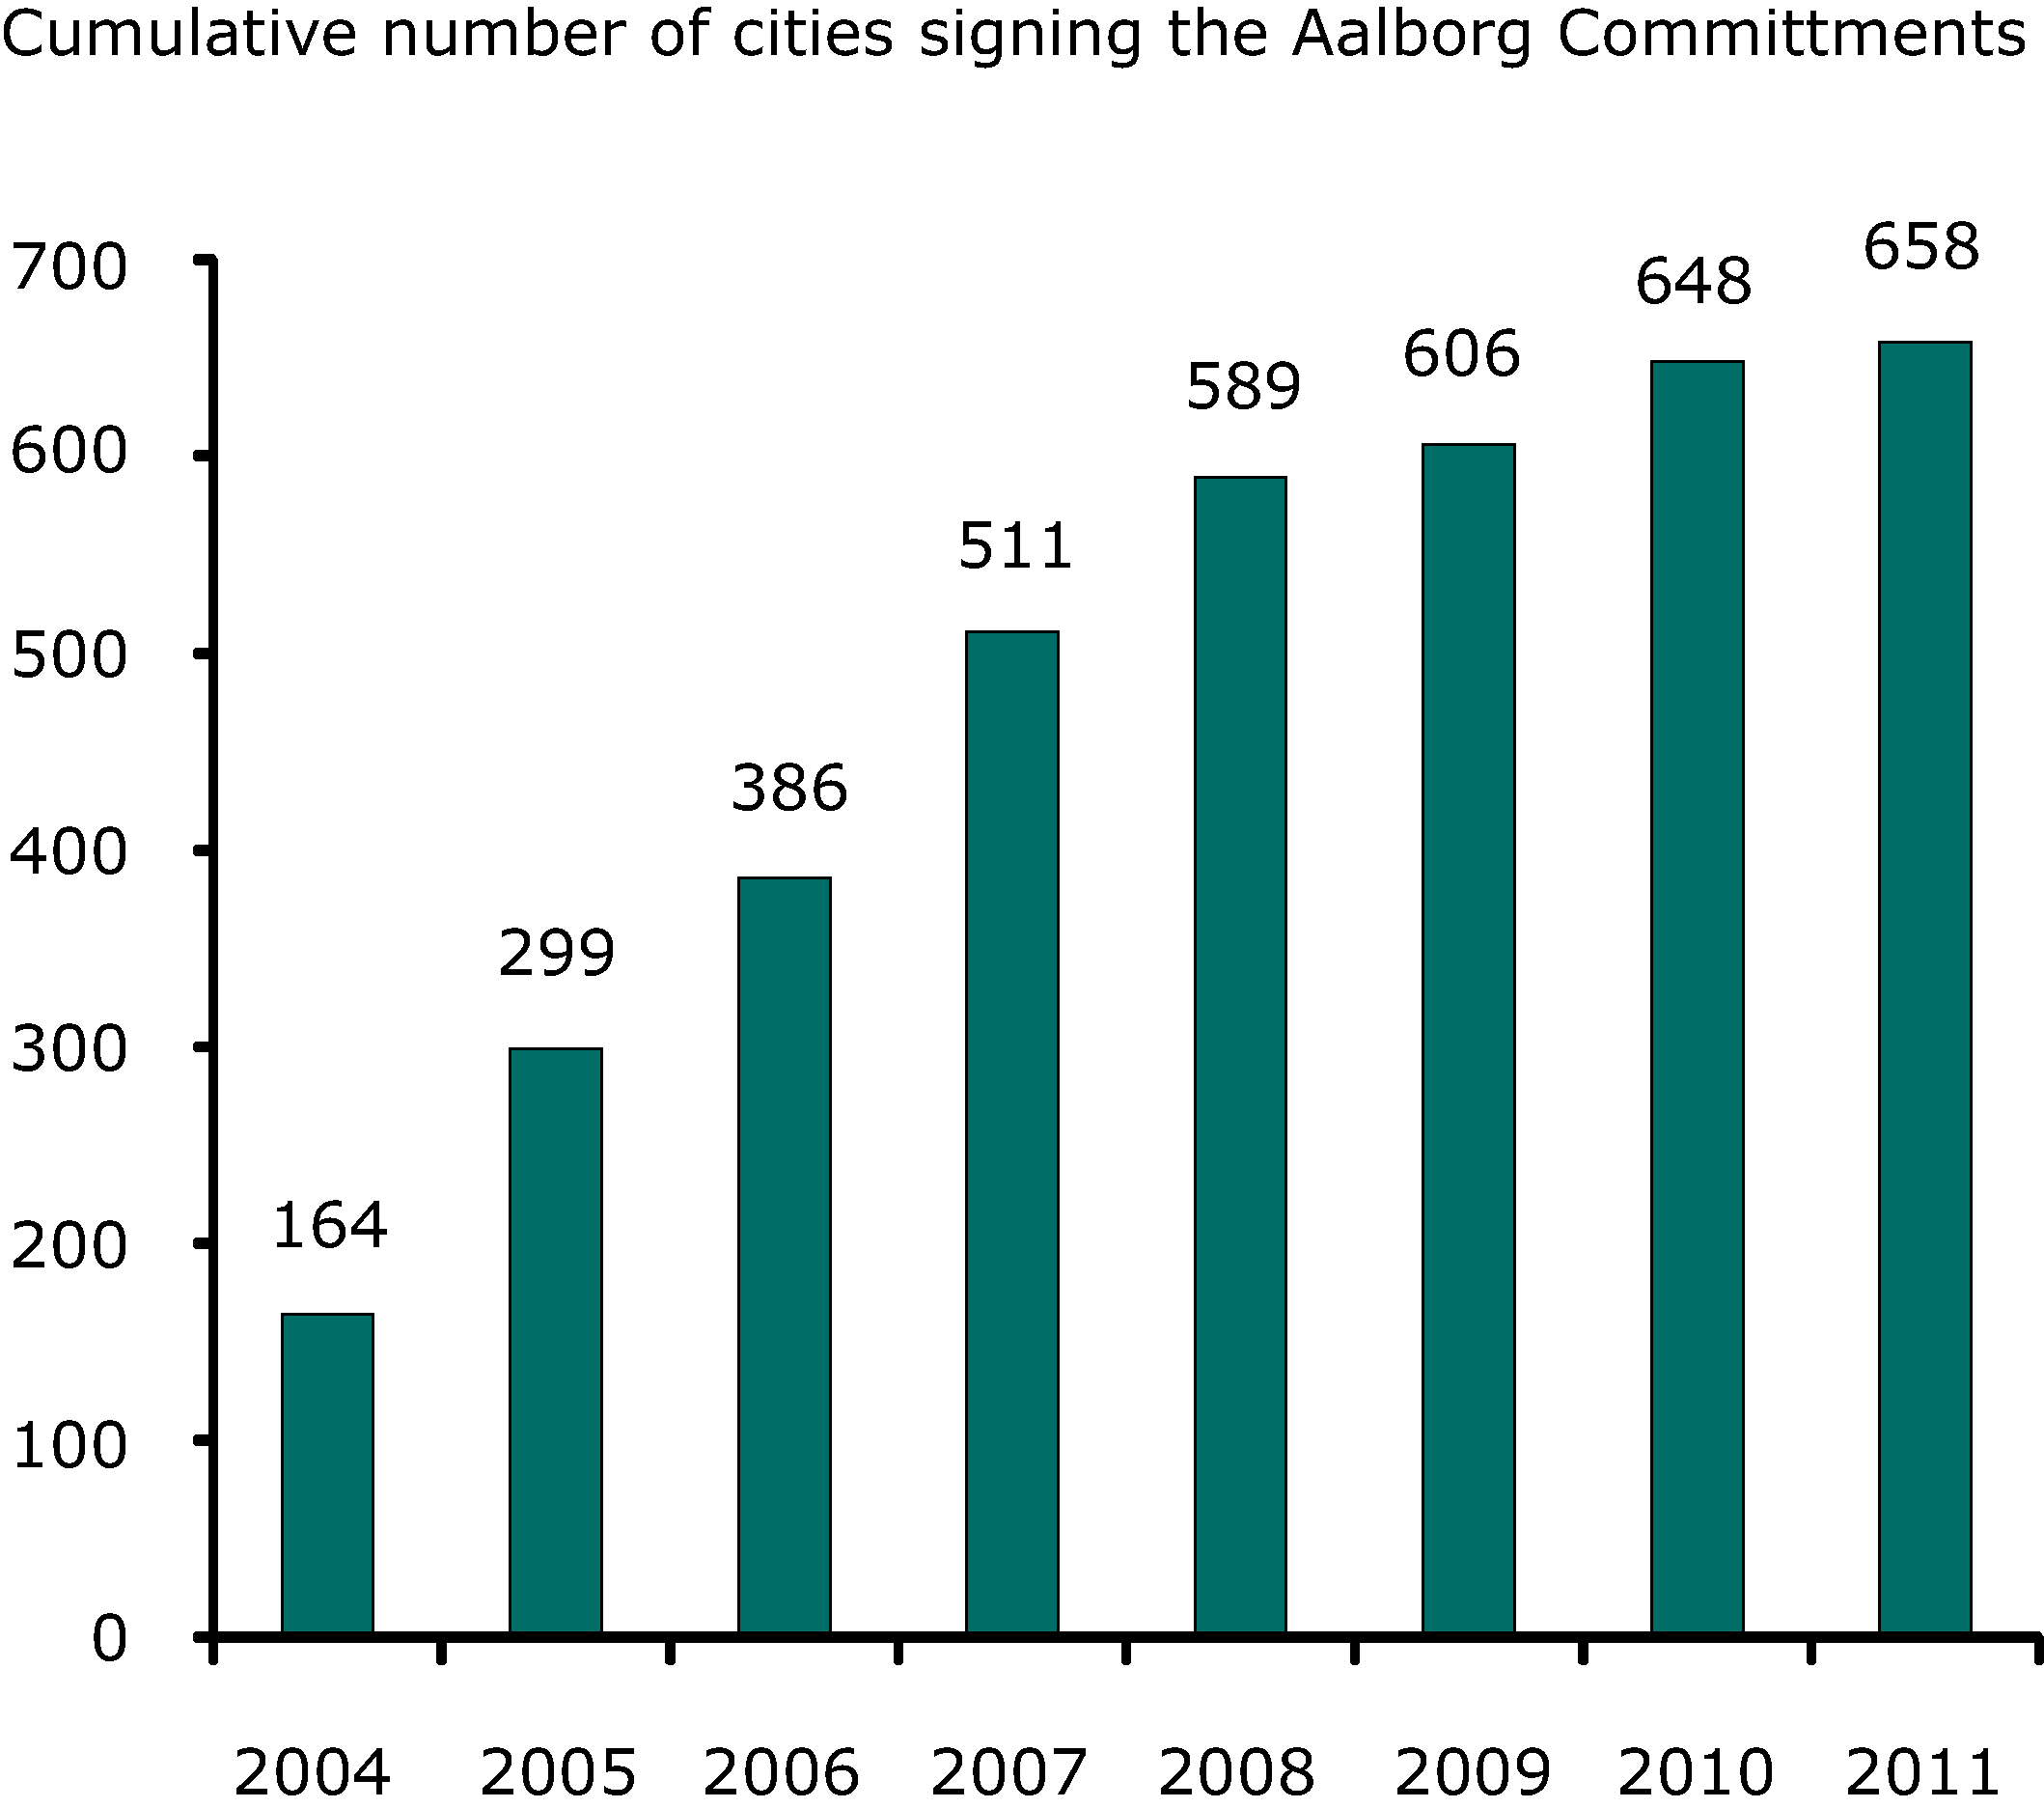 Cumulative number of cities signing the Aalborg Committments, 2004-2011